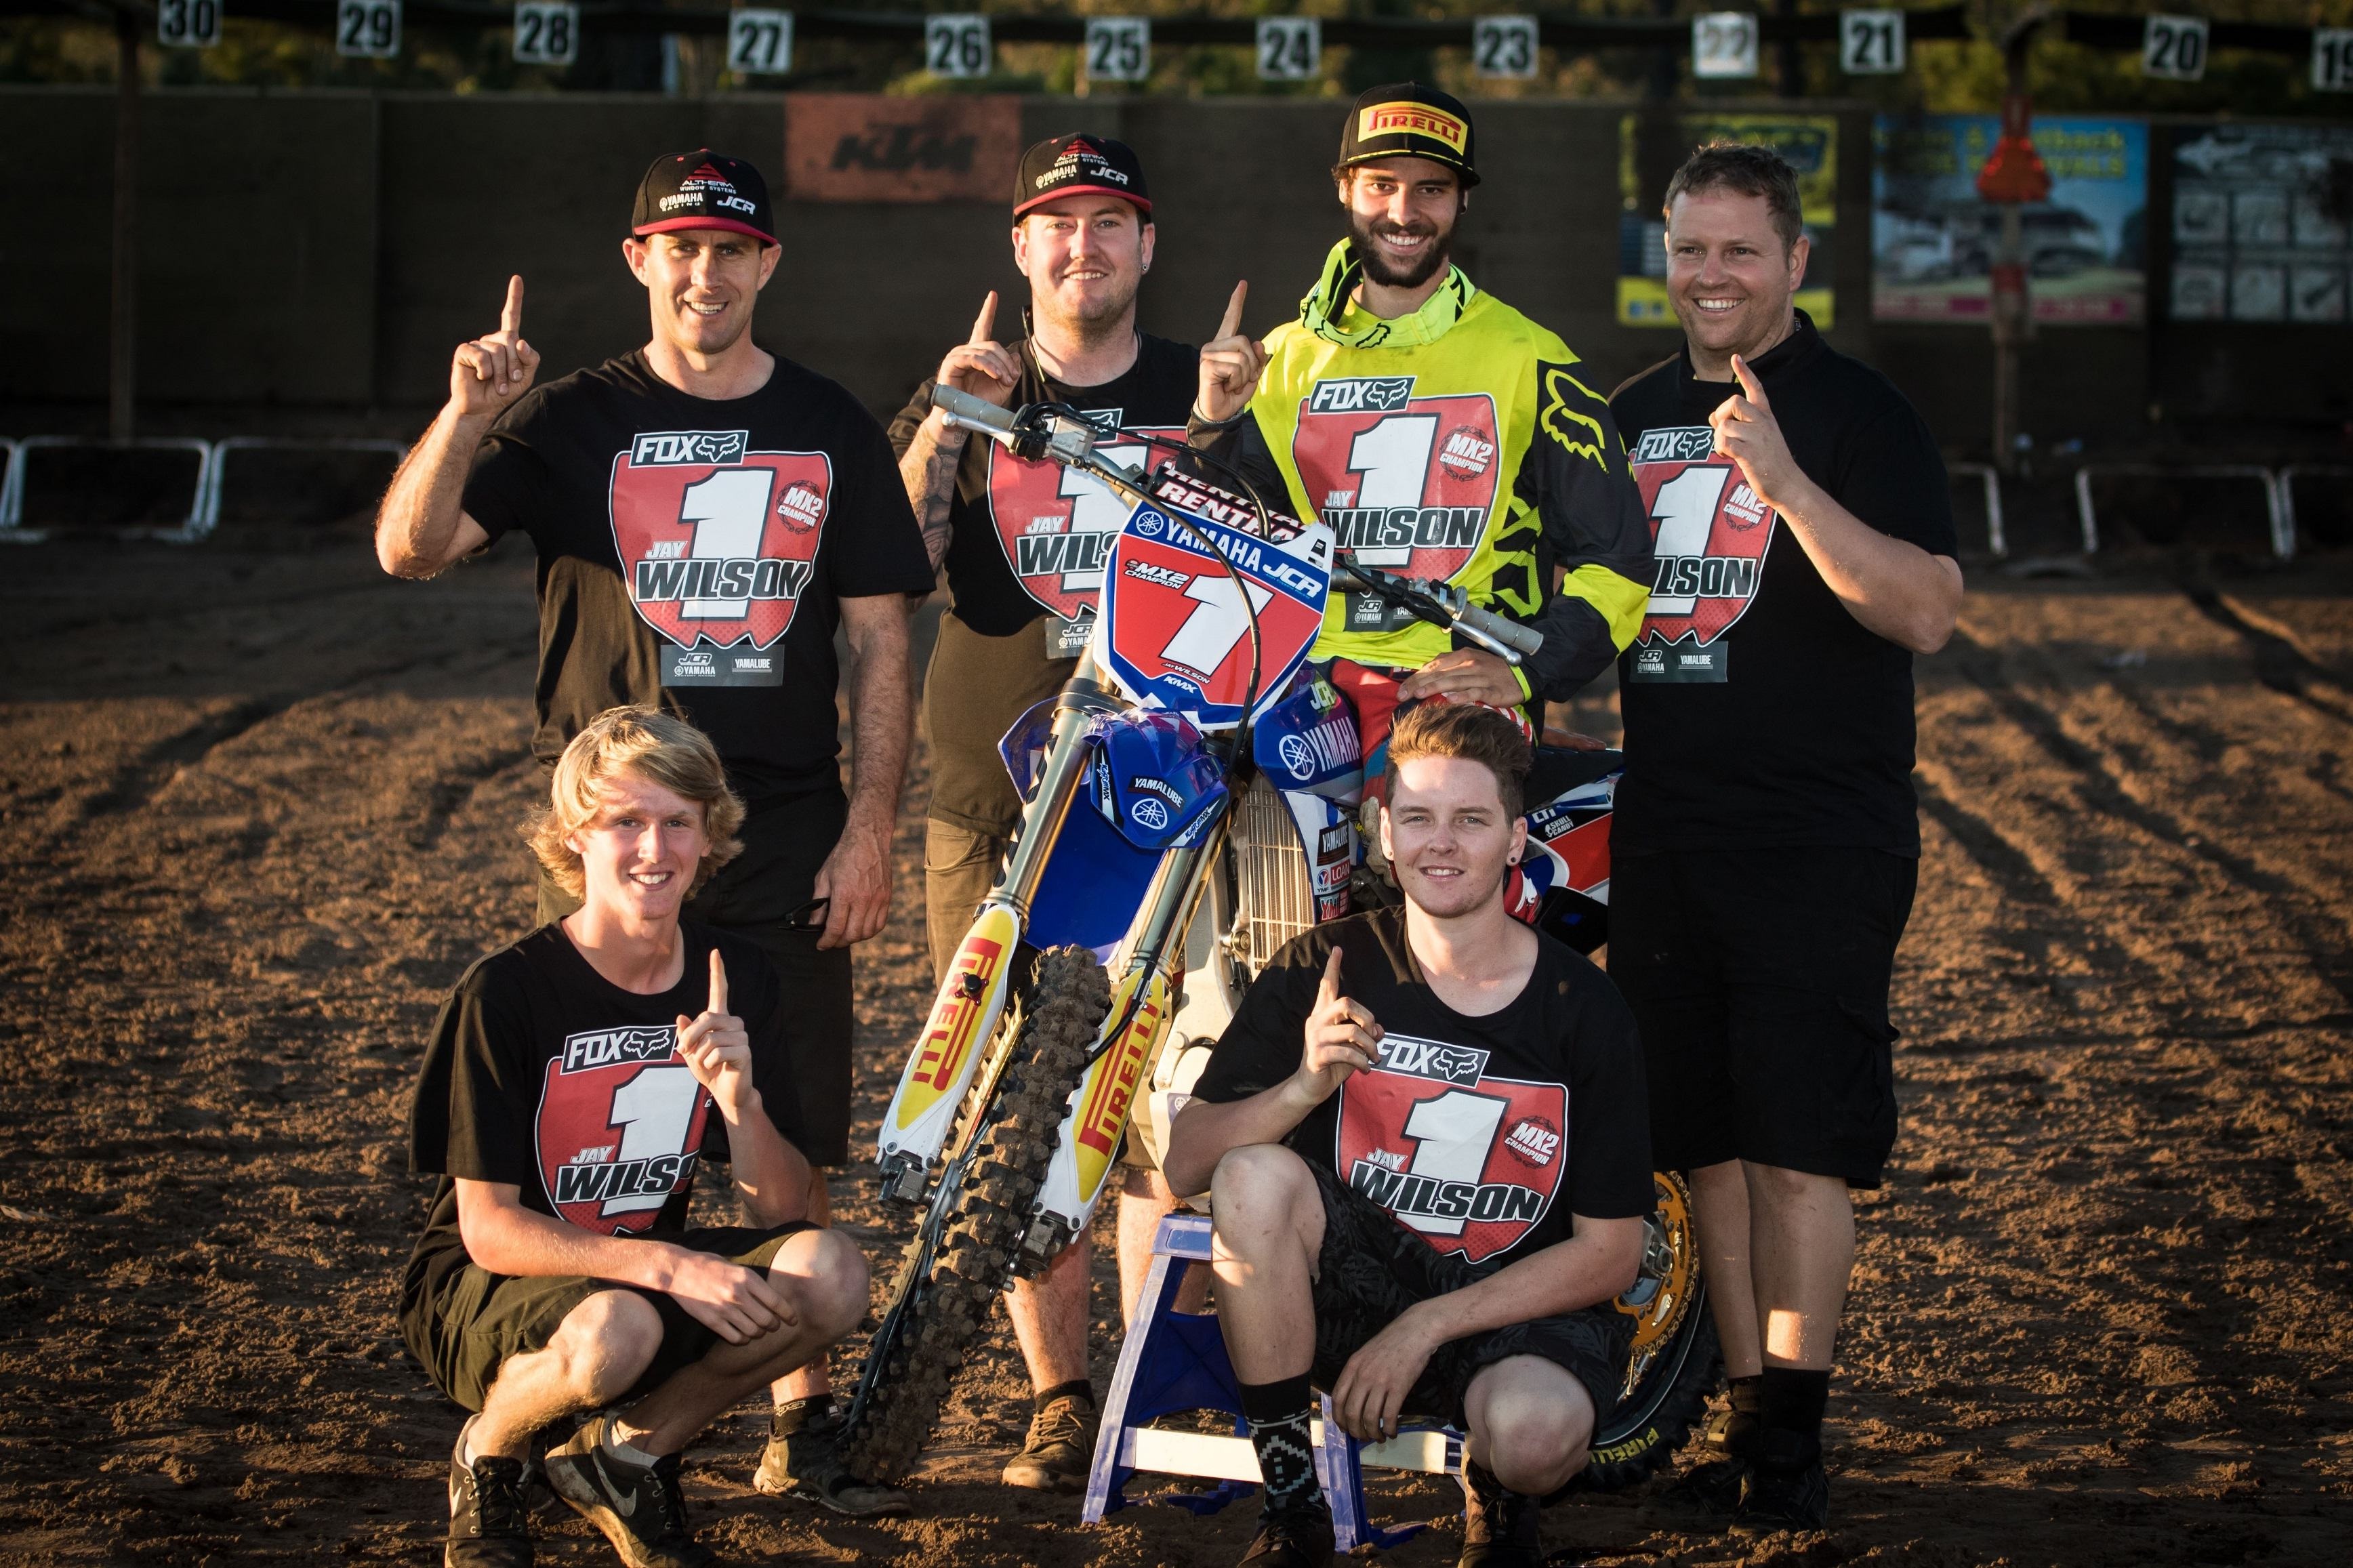 Wilson secured the 2015 MX2 championship